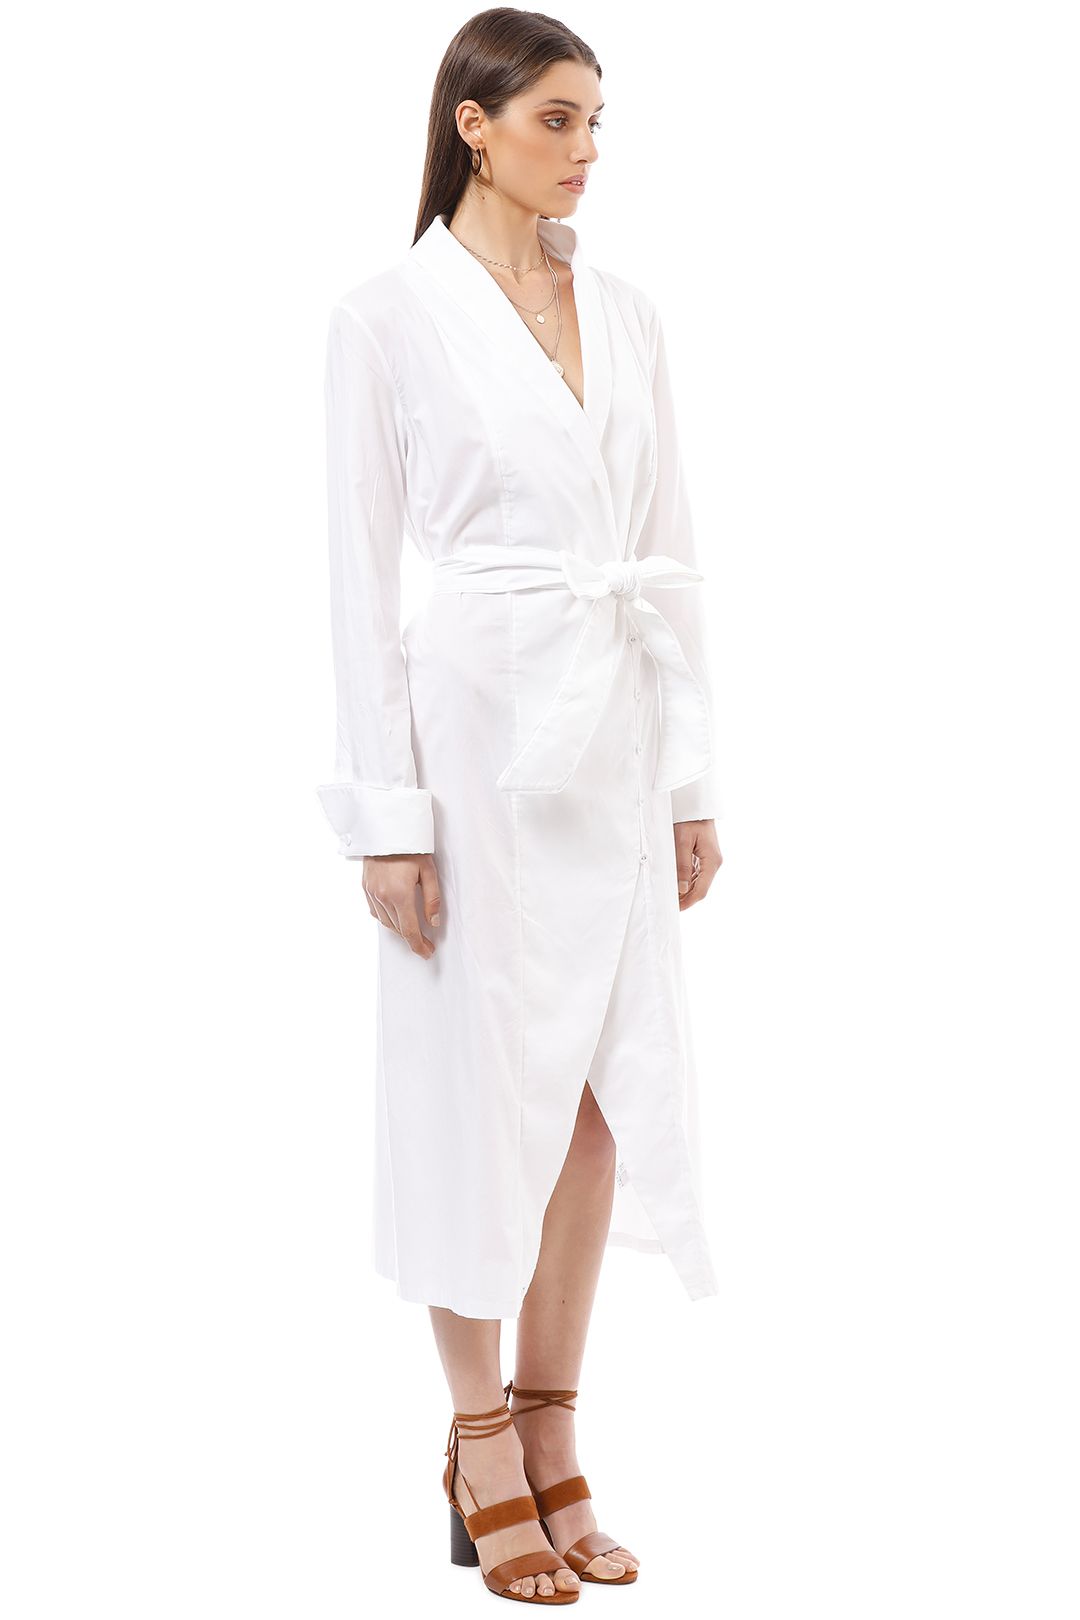 CMEO Collective - Your Type Shirt Dress - White - Side